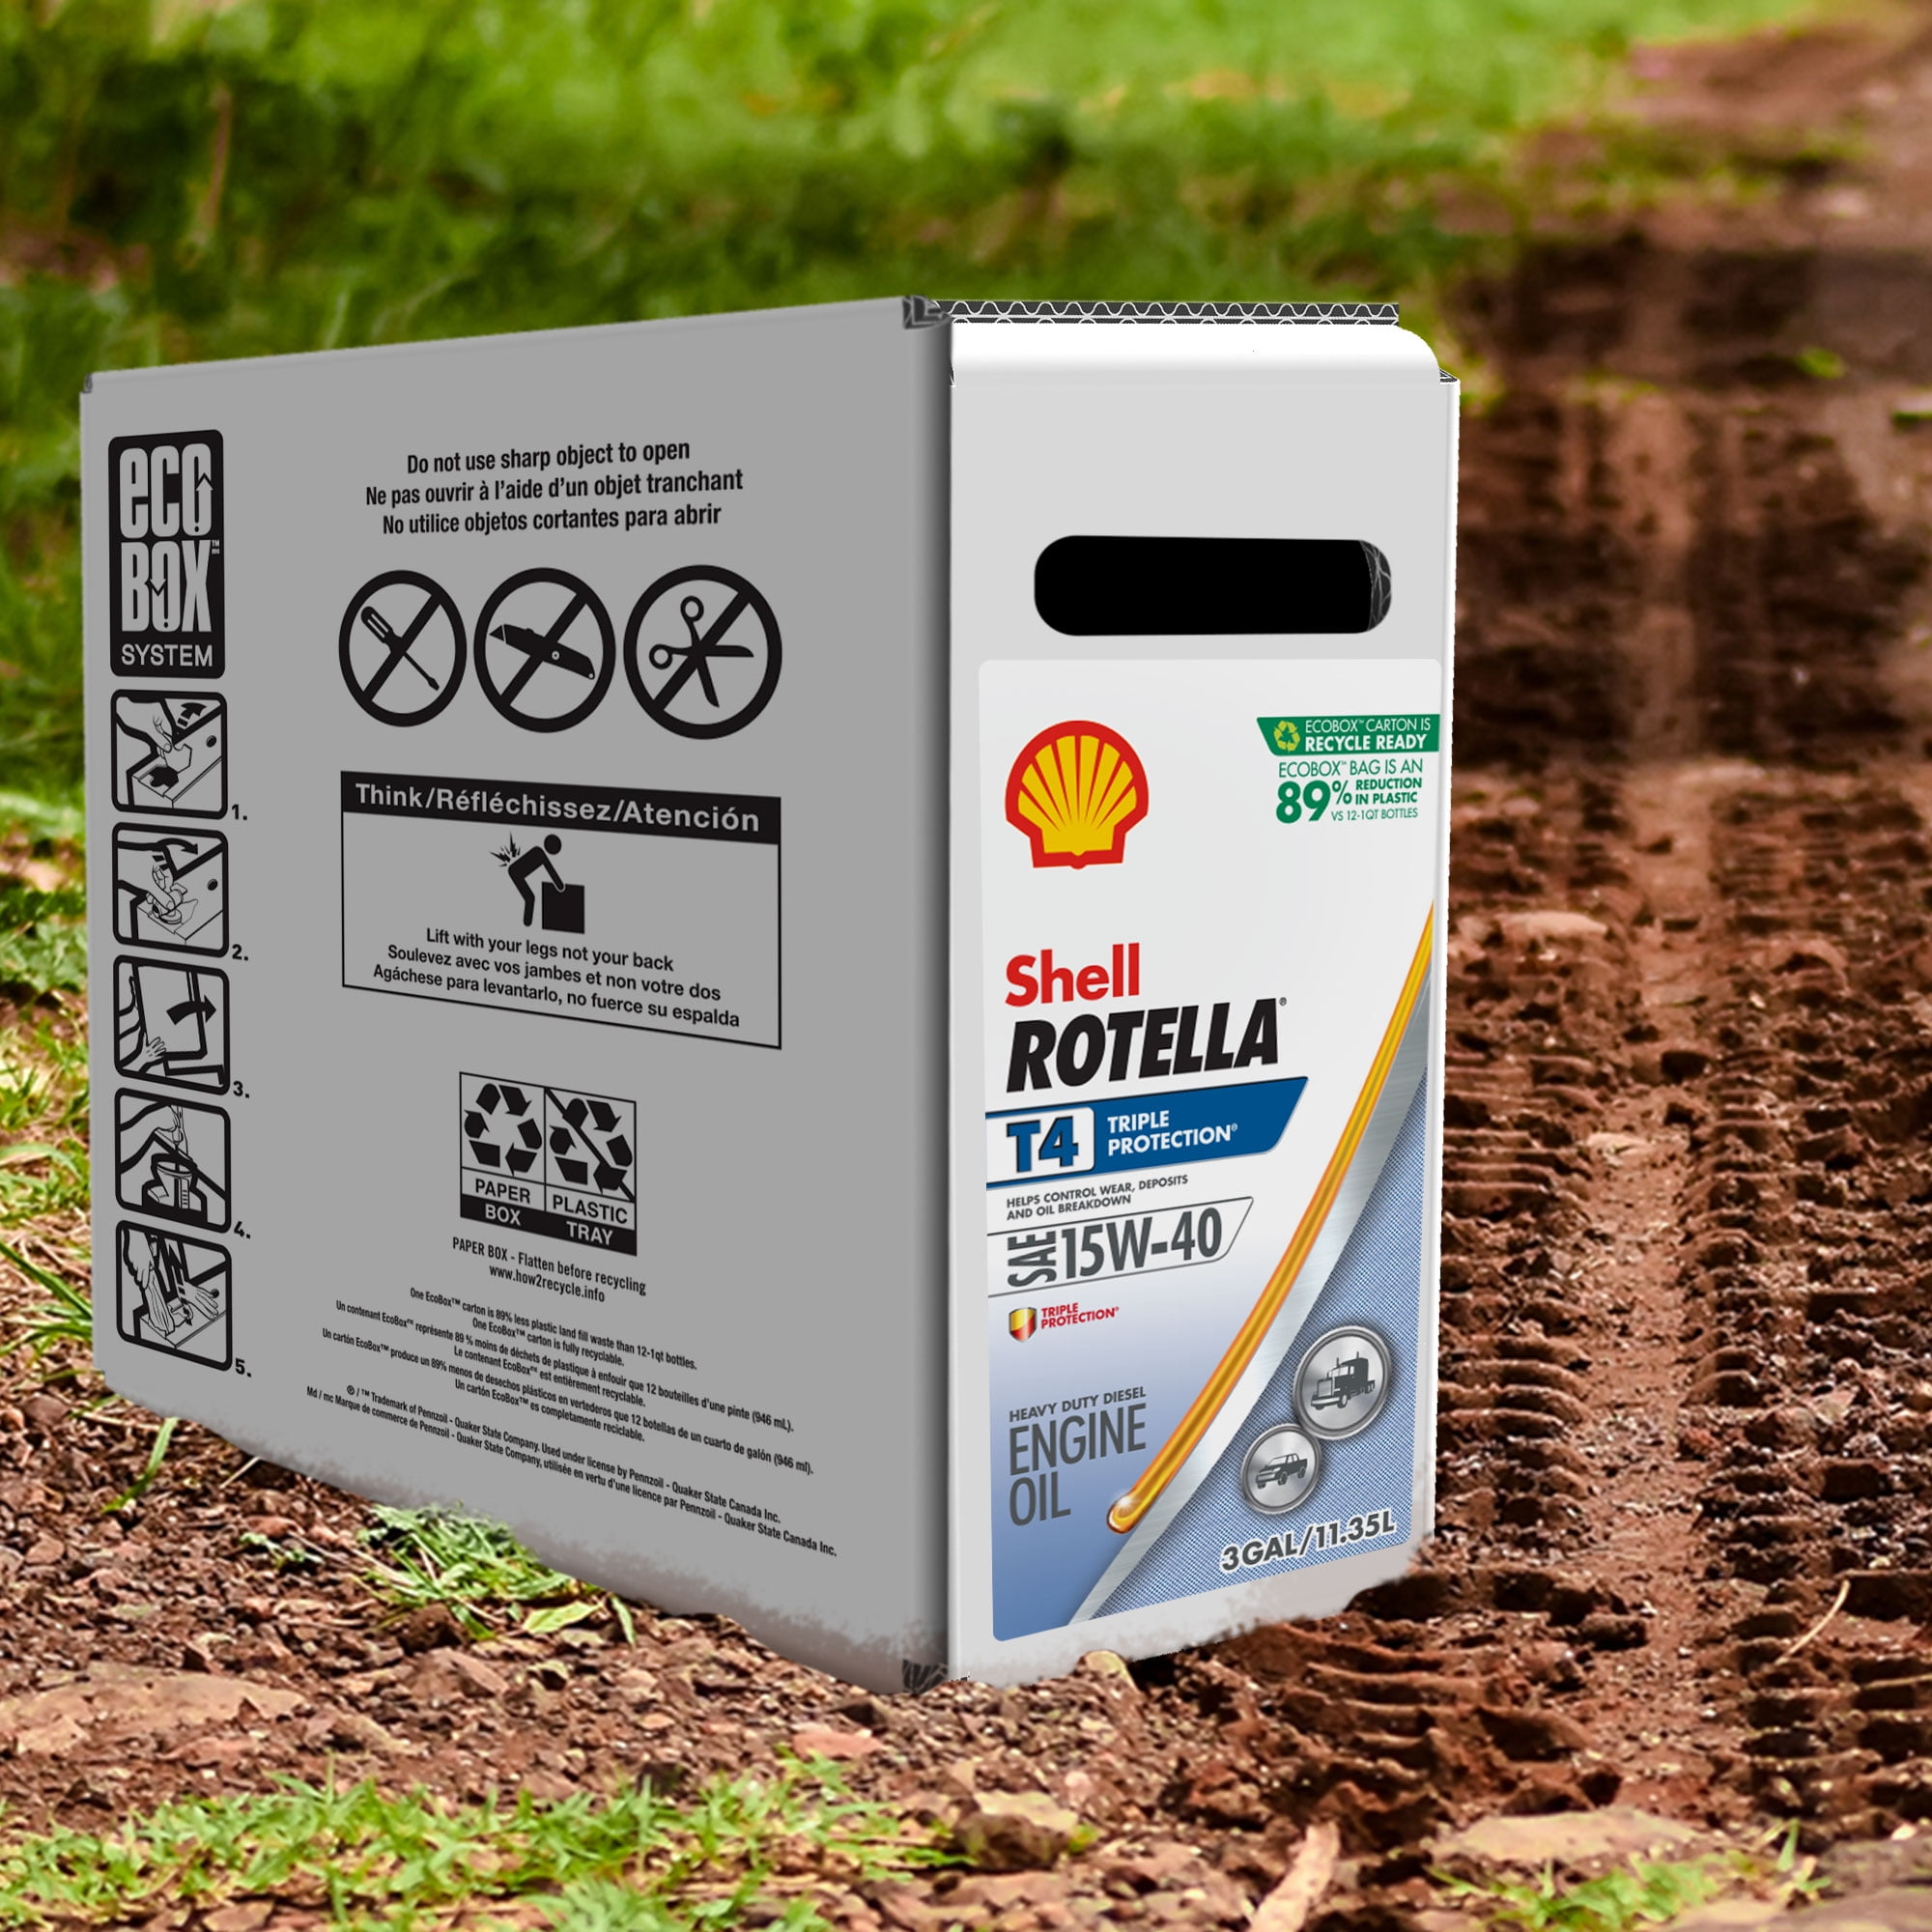 Shell Rotella T4 Triple Protection 15W-40 Diesel Motor Oil, 3 Gallon - 1